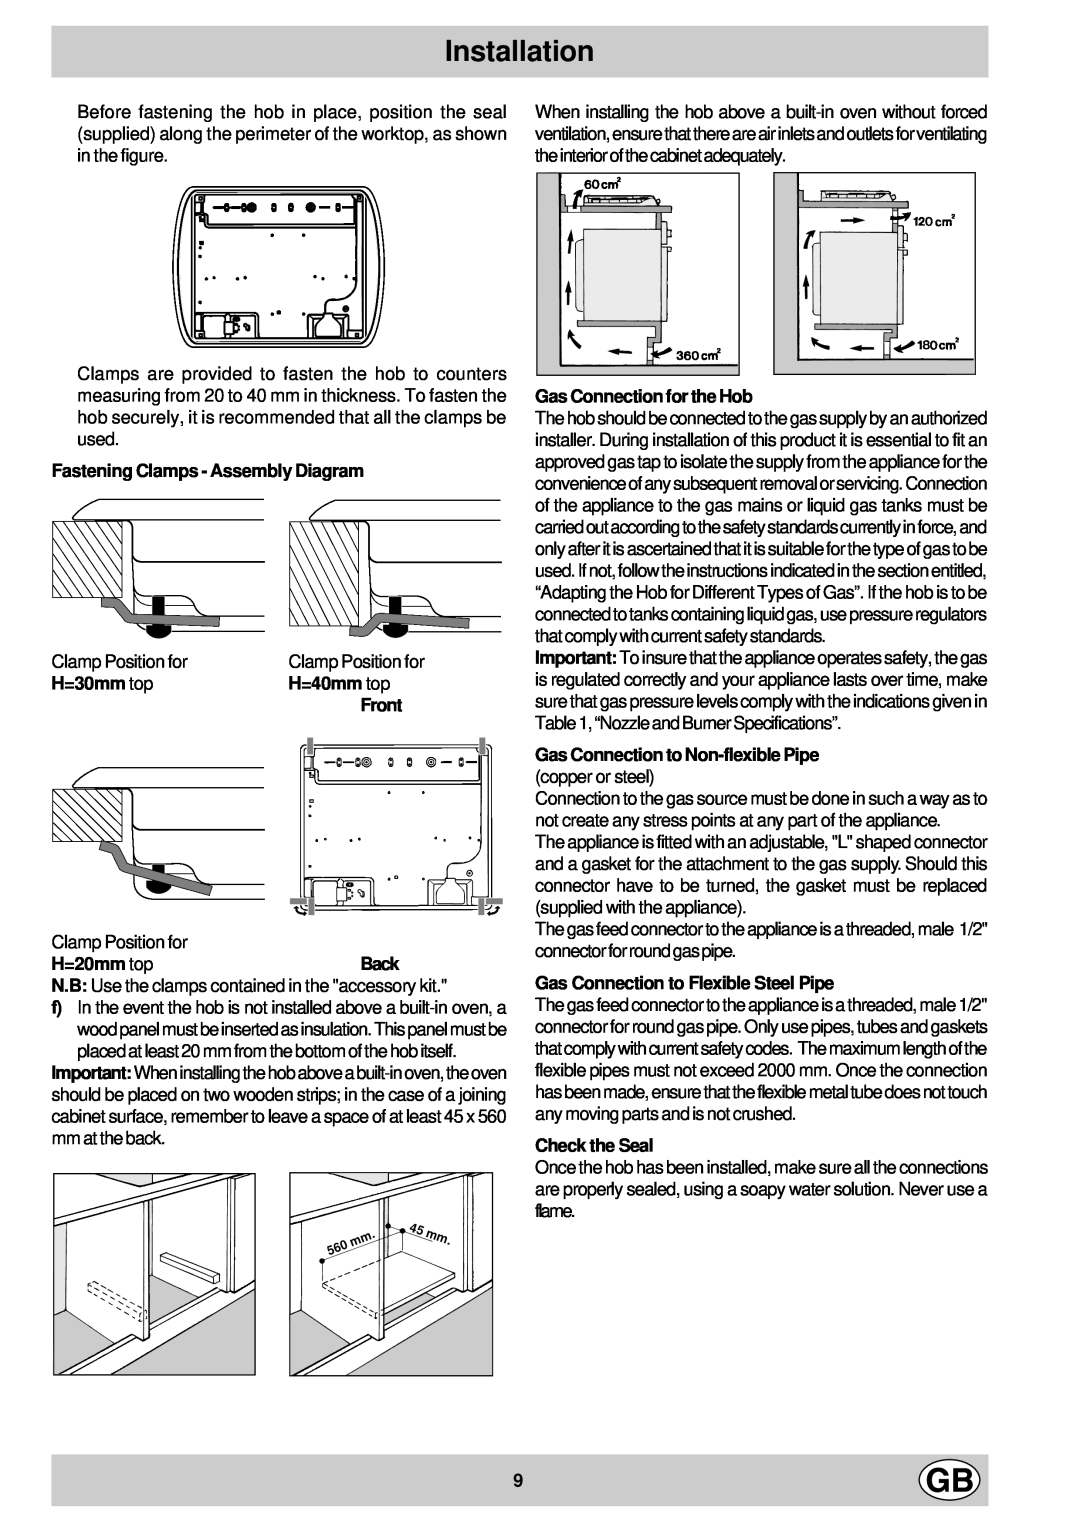 Hotpoint GD74 CH, GD64 Installation, Fastening Clamps - Assembly Diagram, H=30mm top, H=40mm top, Front, H=20mm topBack 